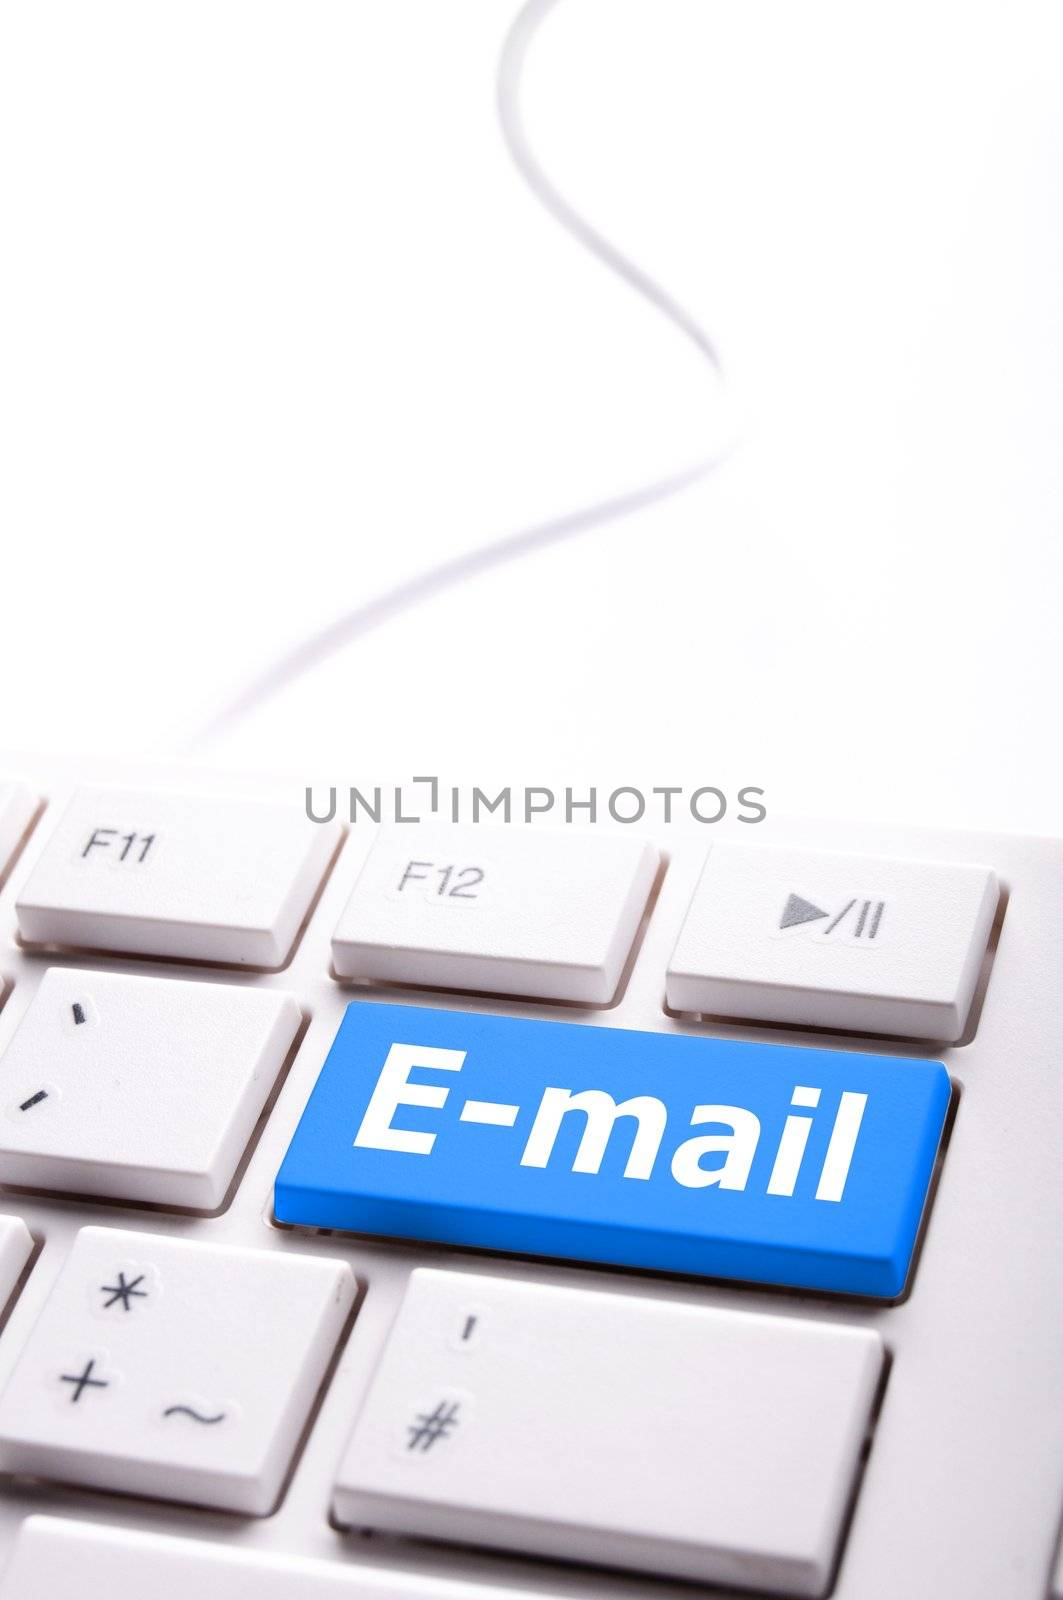 email concept with blue key or buttoen on comuter keyboard